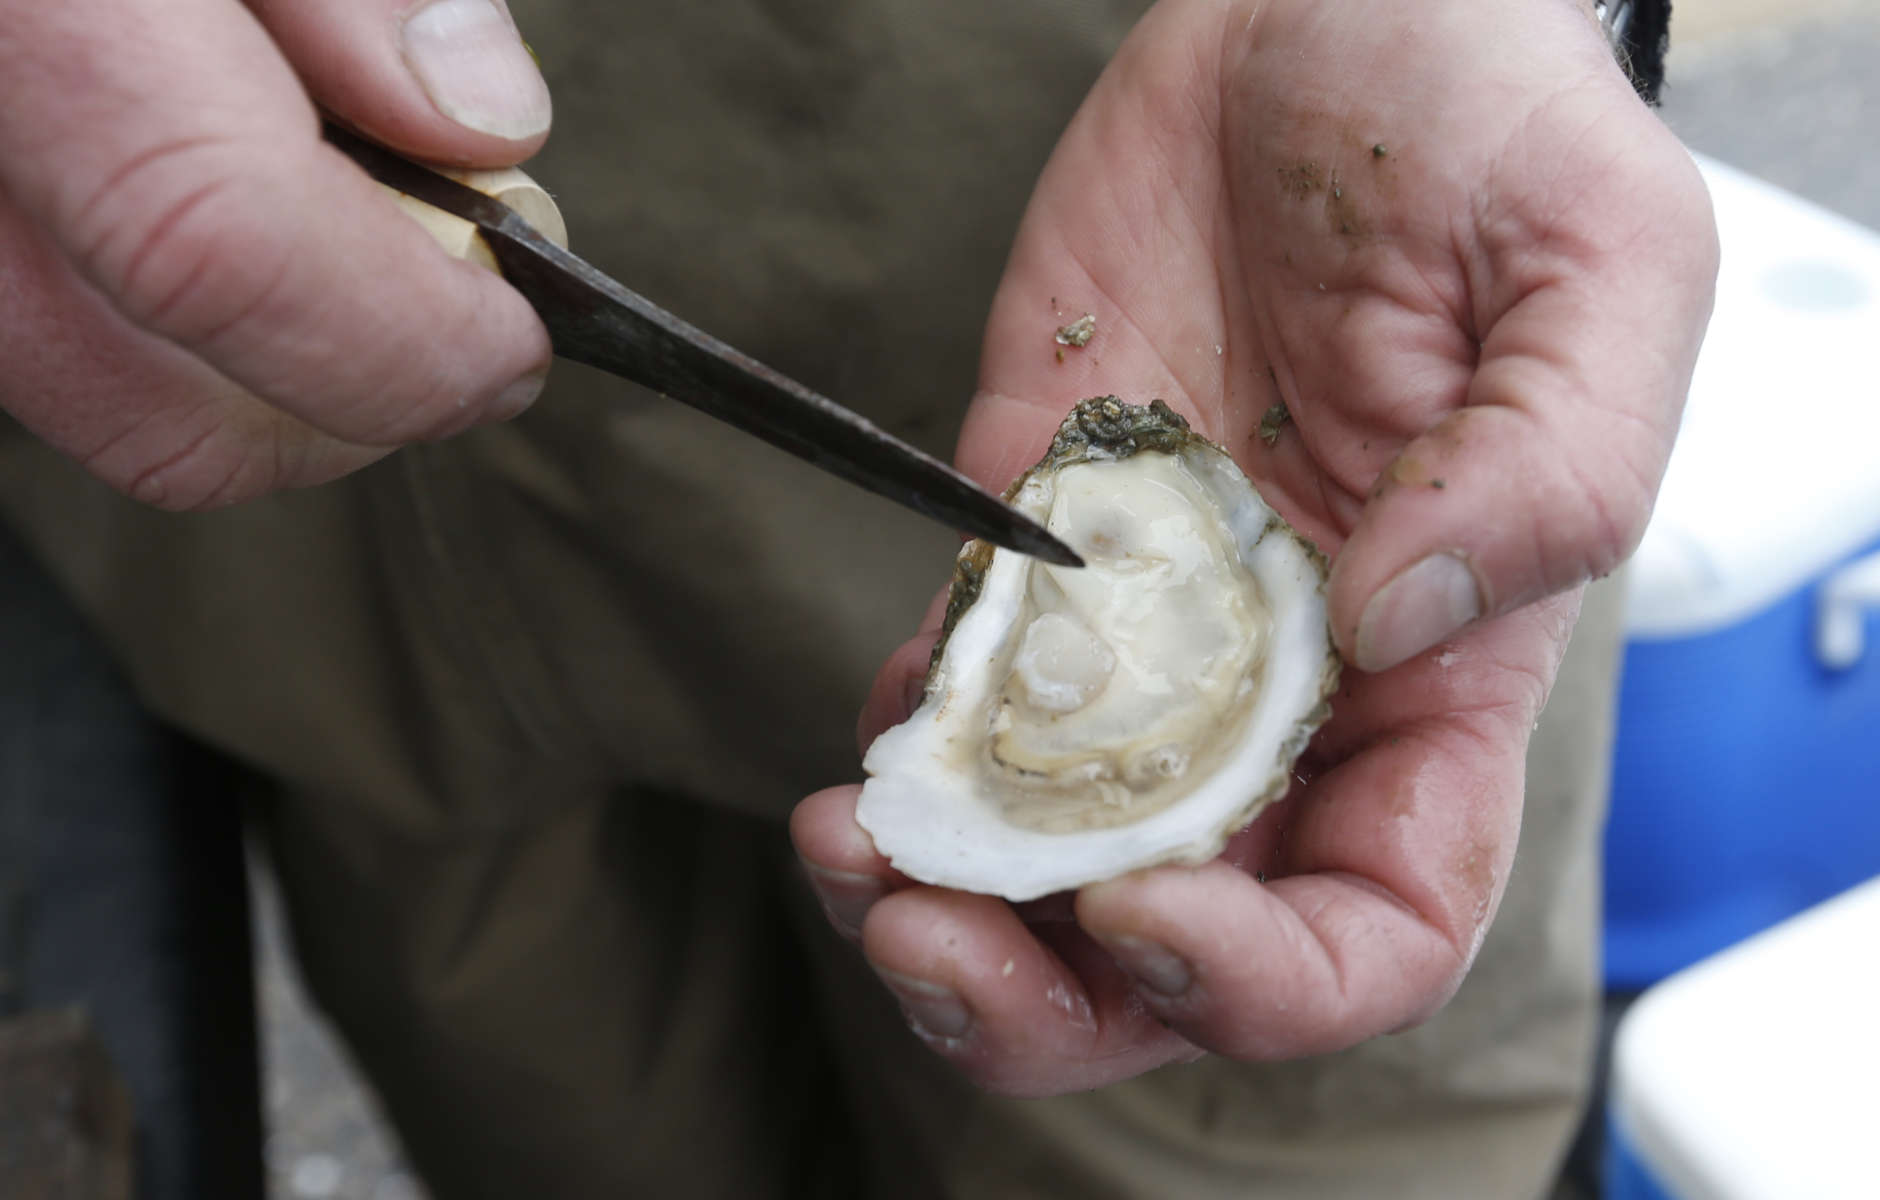 Oysterman Chris Ludford opens one of his oysters after harvesting on some of his leased oyster beds on the Lynnhaven River in Virginia Beach, Virginia, Thursday, Feb. 23, 2017. (AP Photo/Steve Helber)